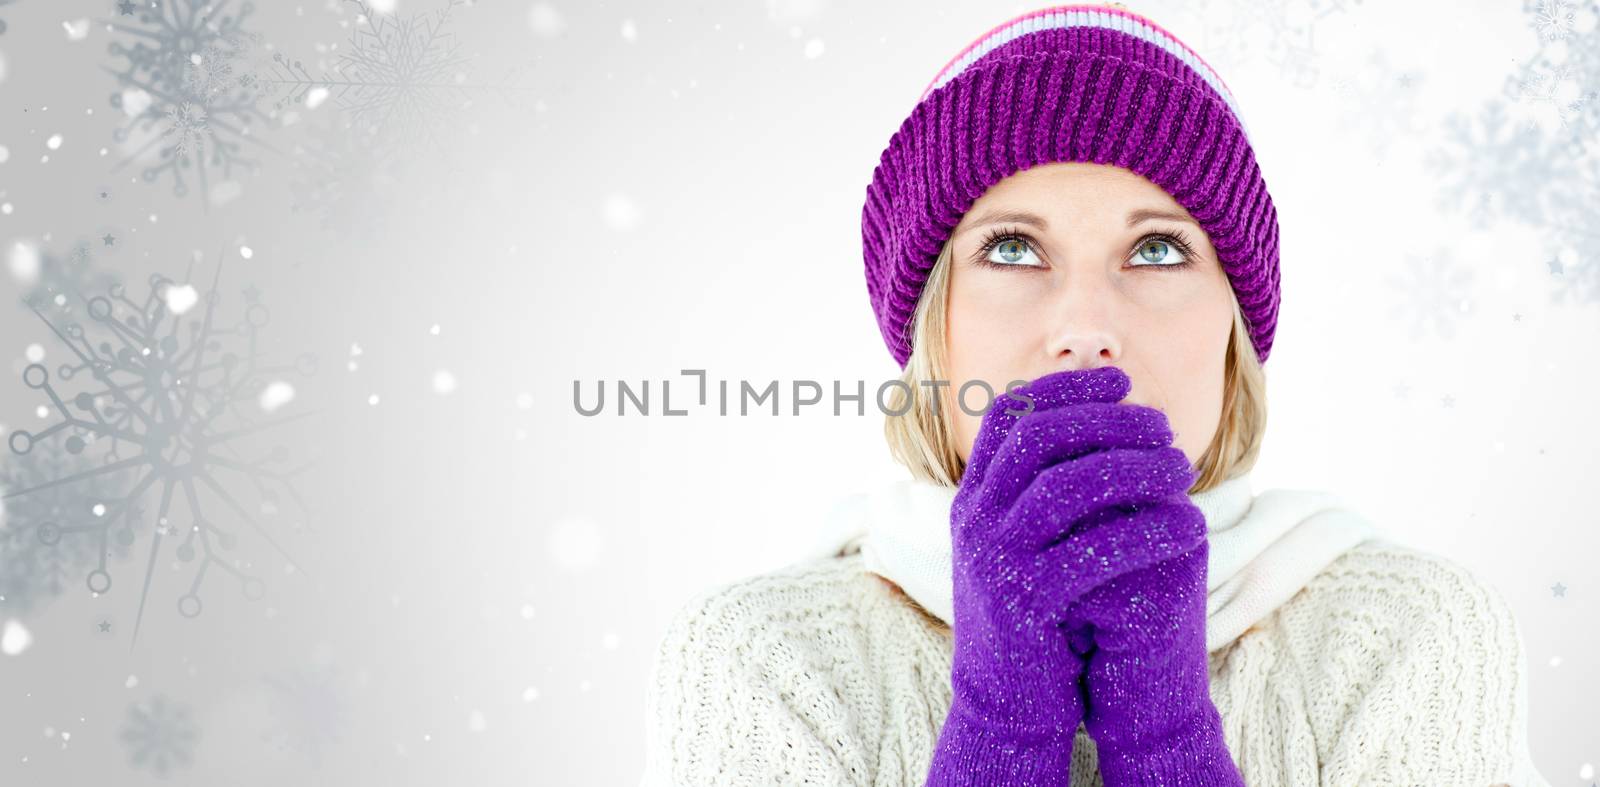 Freezing young woman wearing gloves looking upwards  against snowflake pattern